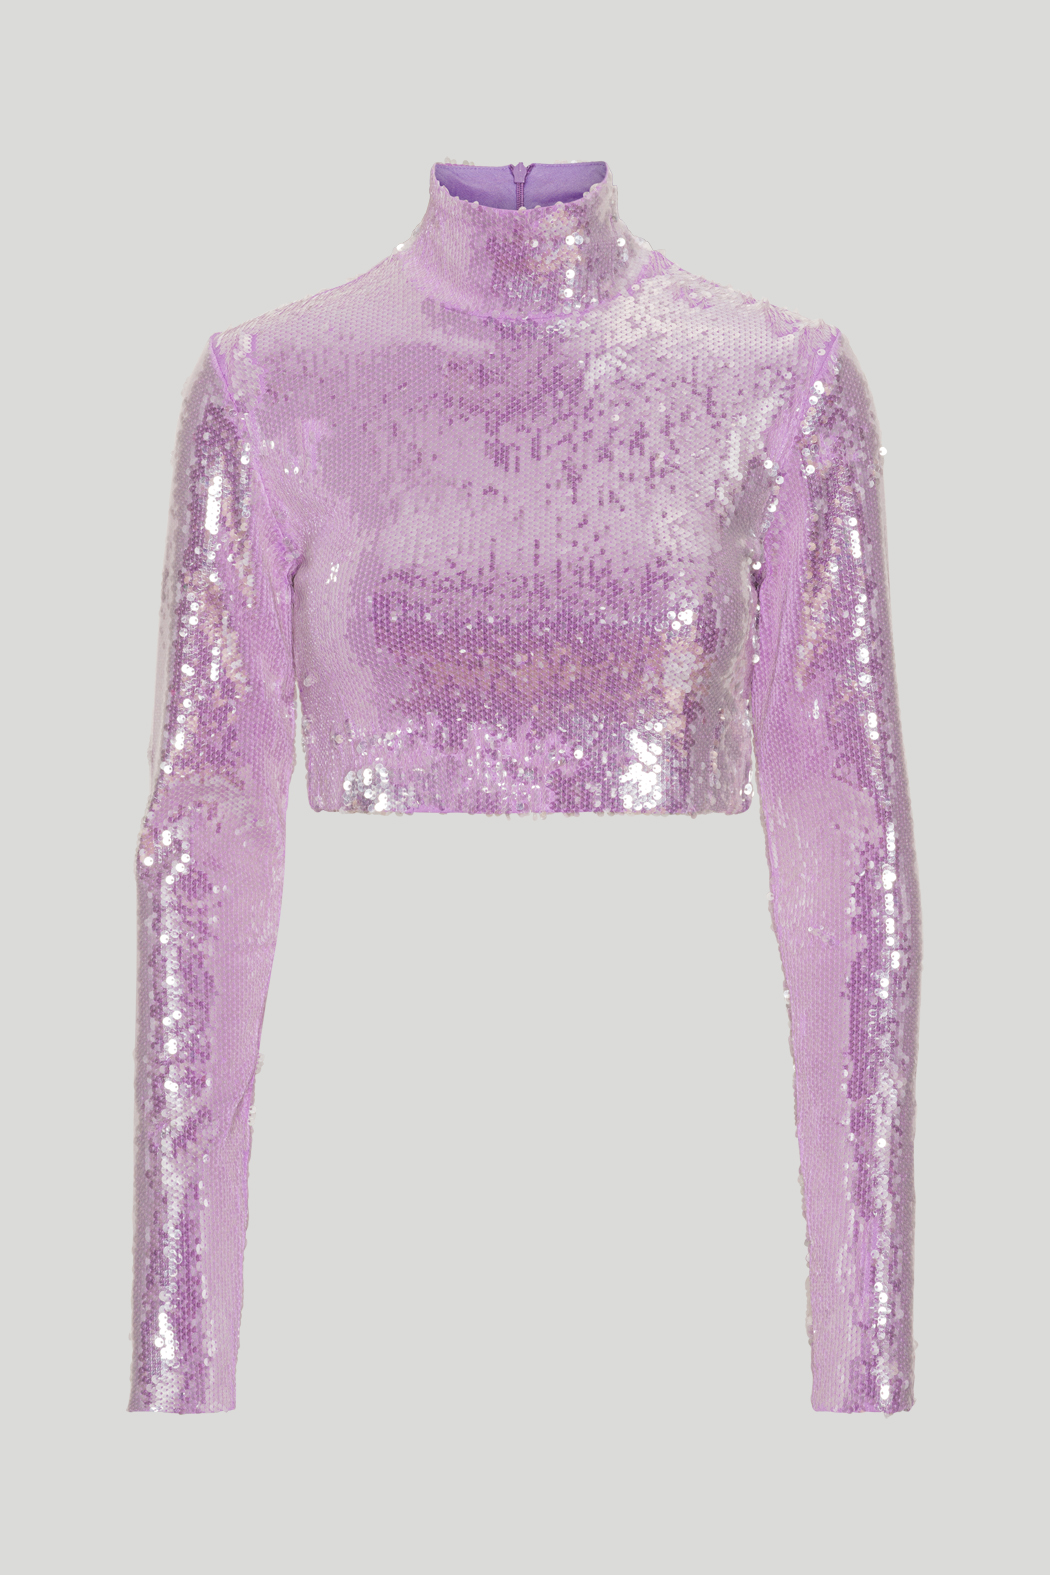 ROTATE BY BIRGER CHRISTENSEN SEQUIN TURTLENECK CROPPED TOP RT2380 ...